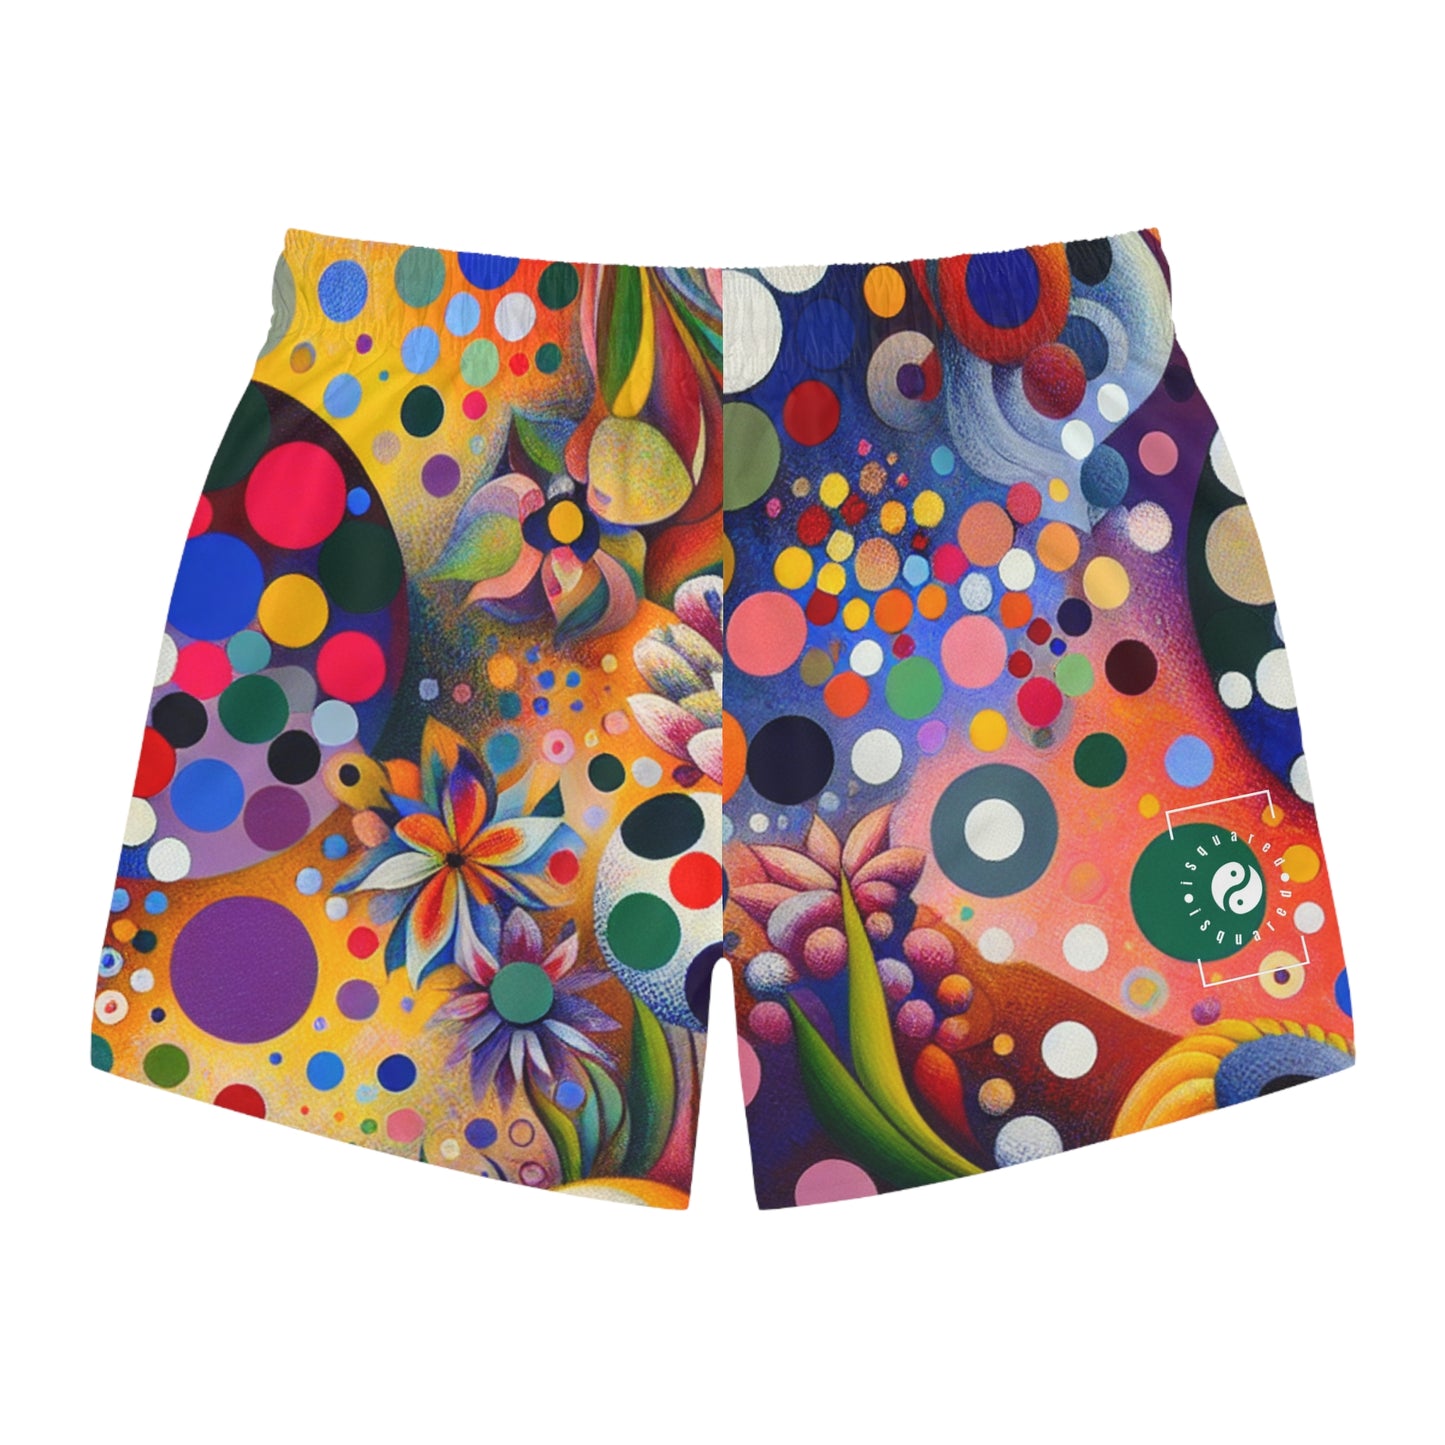 "Polka Petals in Yogic Surrealism: An Artistic Salute to Kusama and Kahlo" - Swim Trunks for Men